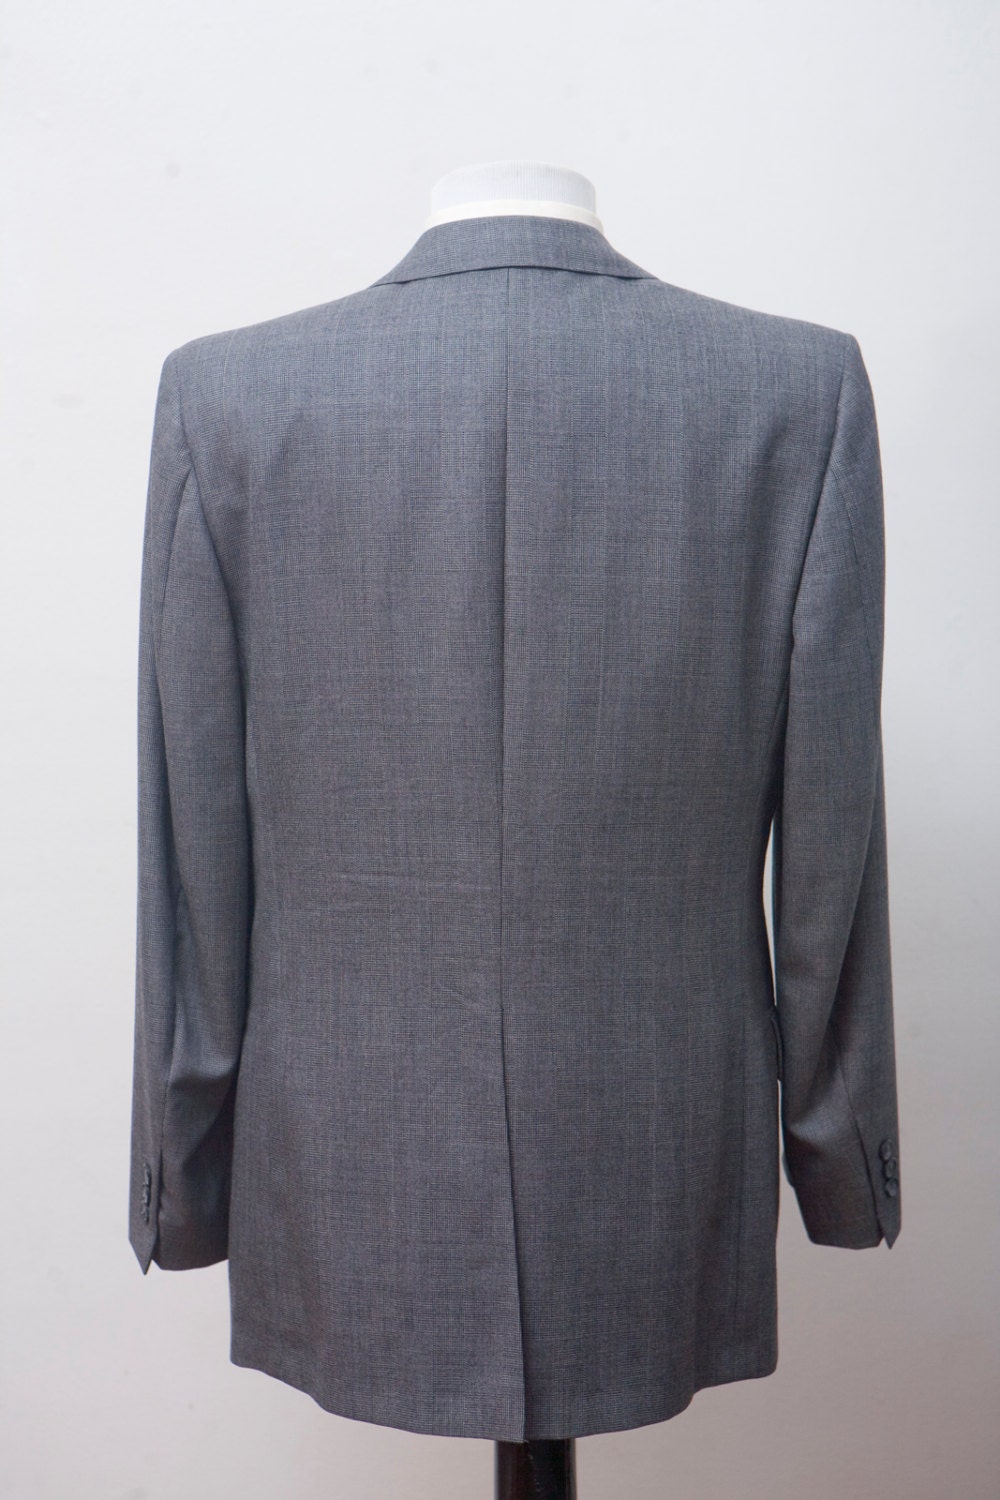 Men's Givenchy Suit / Vintage Grey Blazer and Trousers / - Etsy